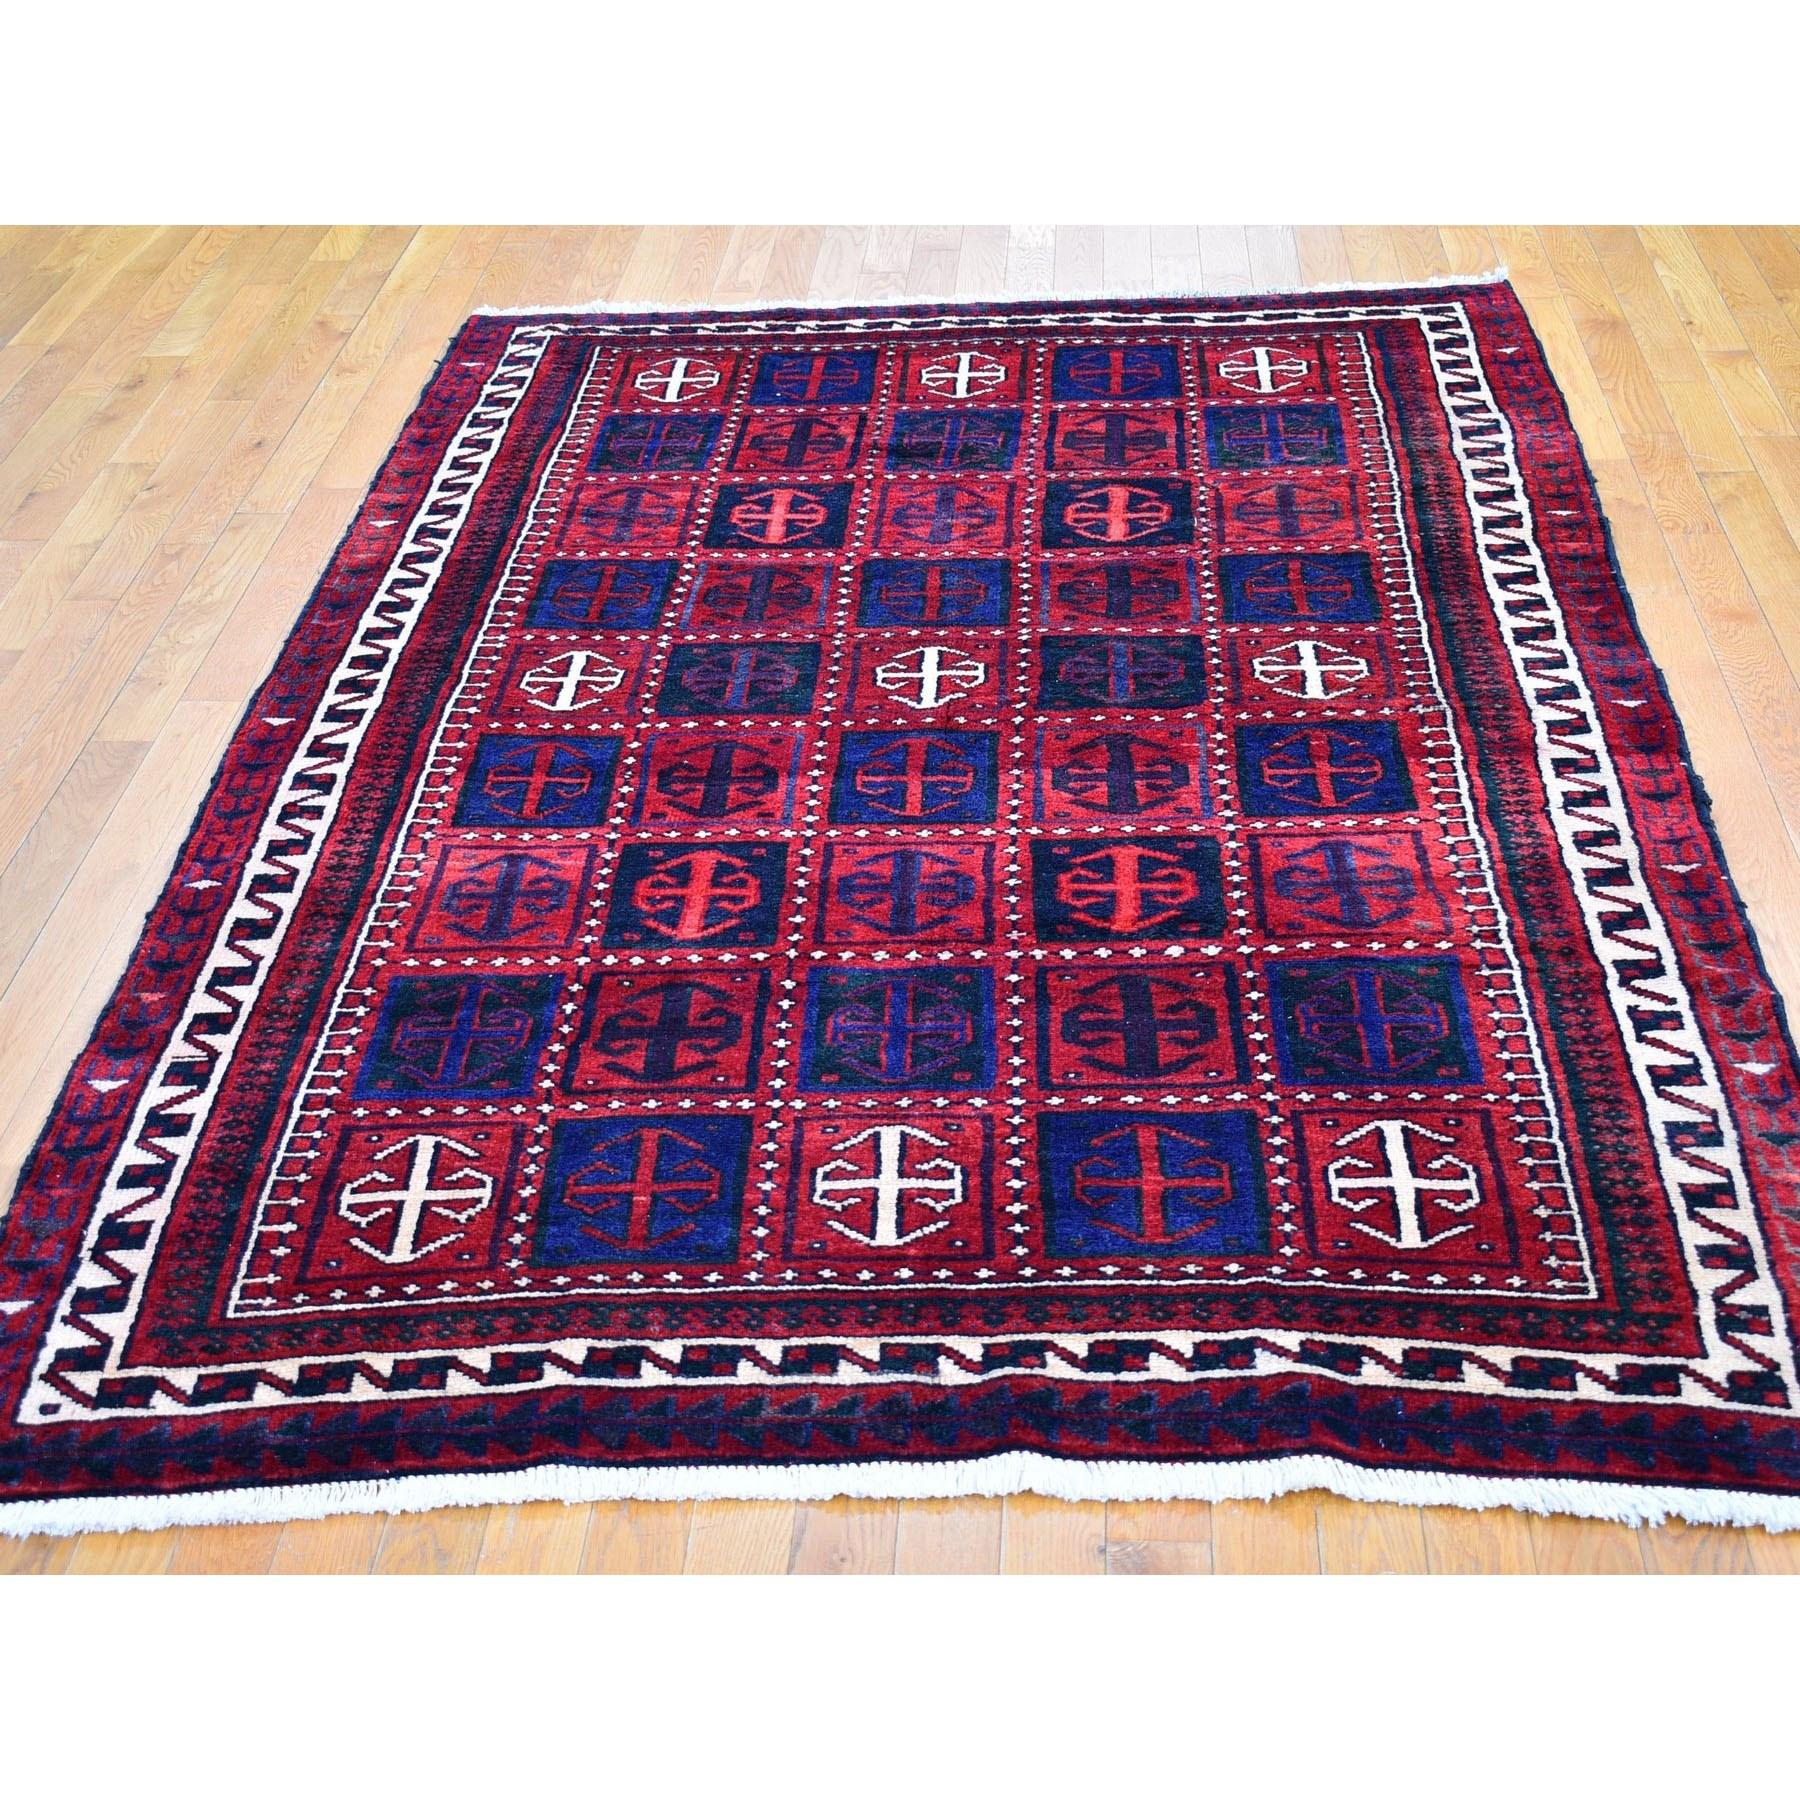 This fabulous hand-knotted carpet has been created and designed for extra strength and durability. This rug has been handcrafted for weeks in the traditional method that is used to make
Exact Rug Size in Feet and Inches : 5'8